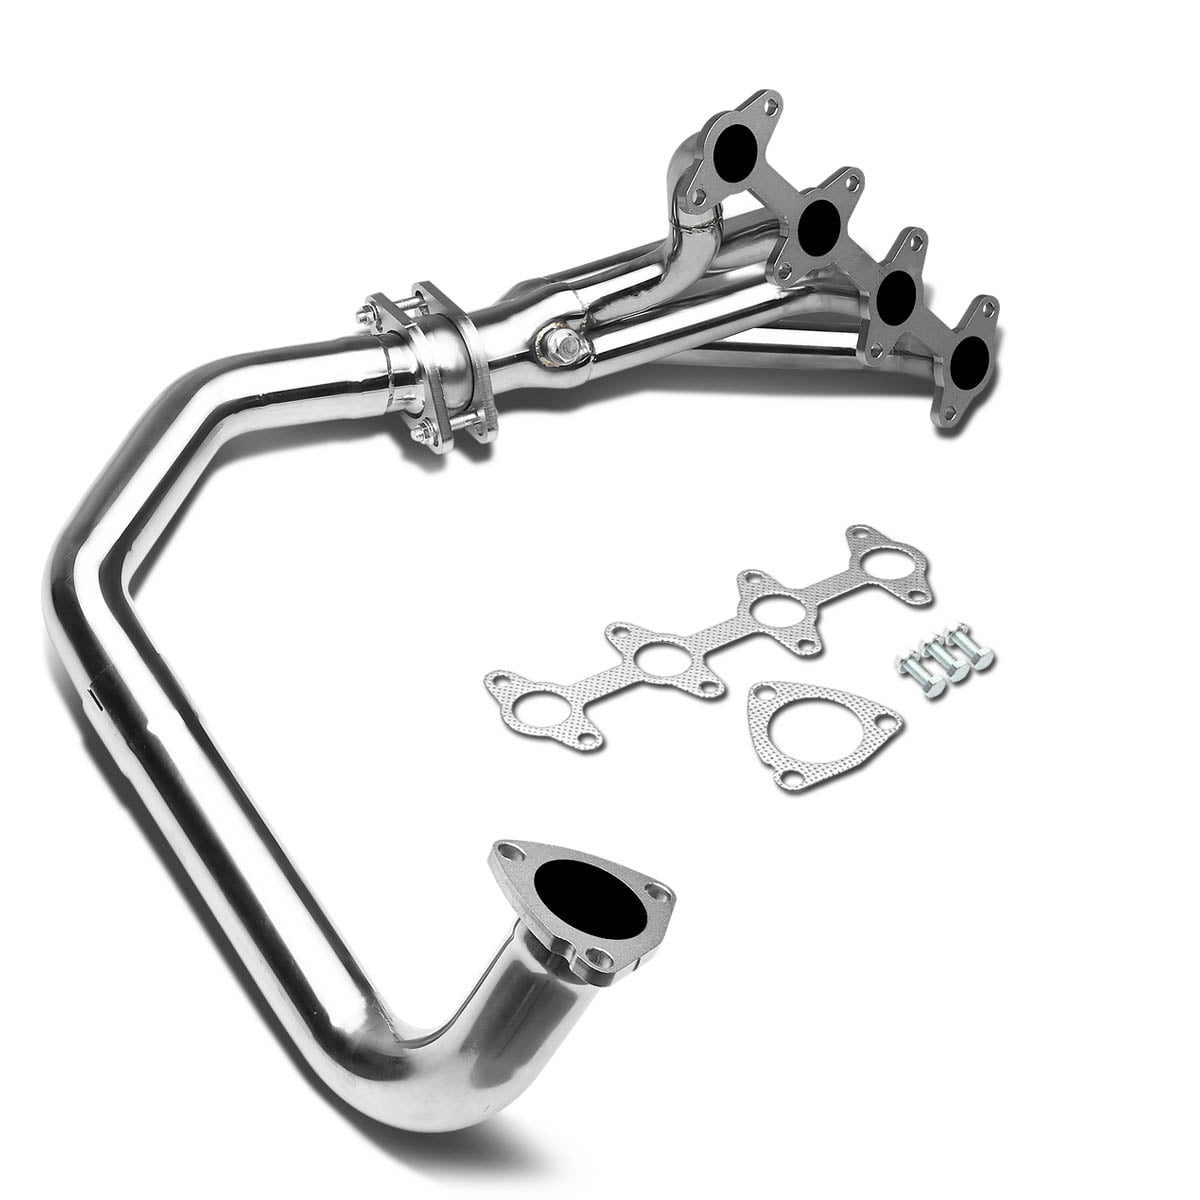 for 94-04 Chevy S-10/GMC SONOMA 2.2L PICKUP SS Racing Manifold Header/Exhaust